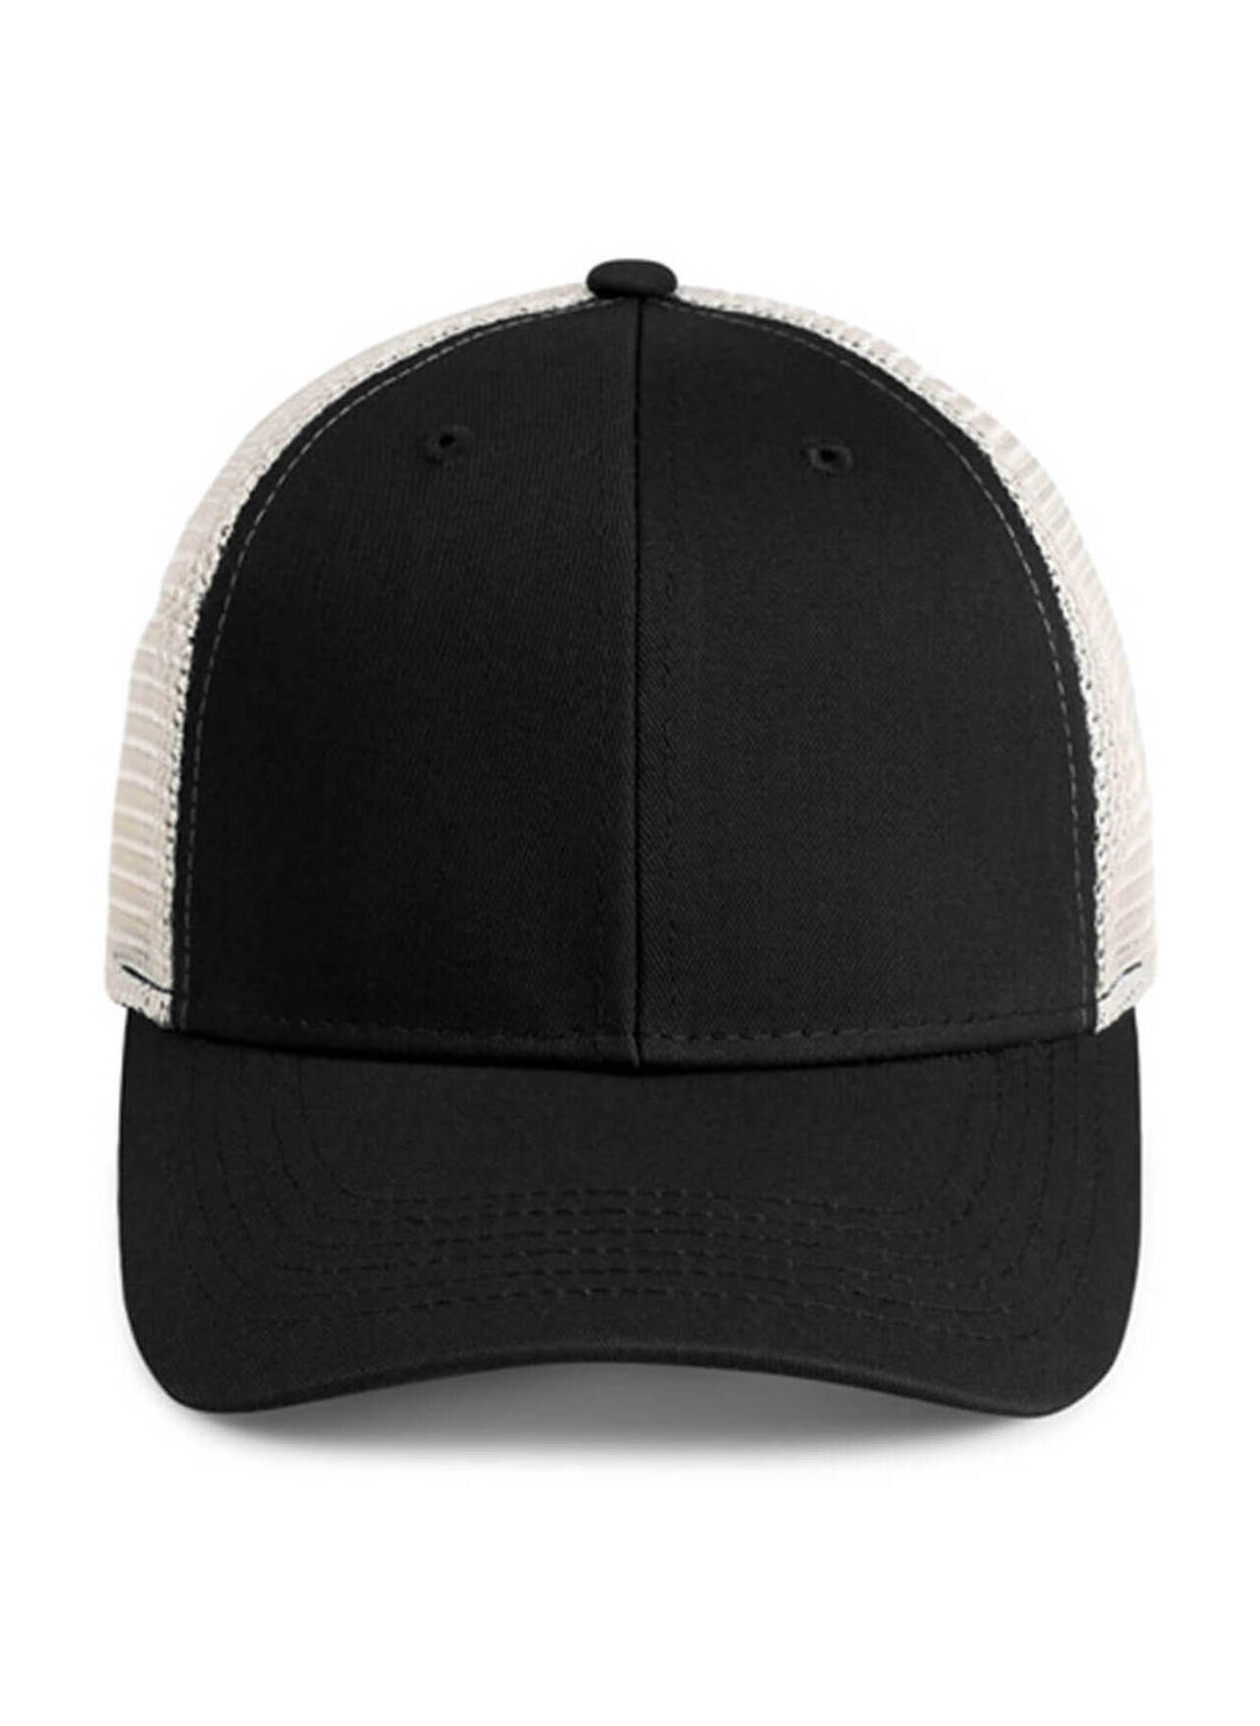 Imperial Black / Stone The Catch & Release Hat Adjustable Meshback Hat